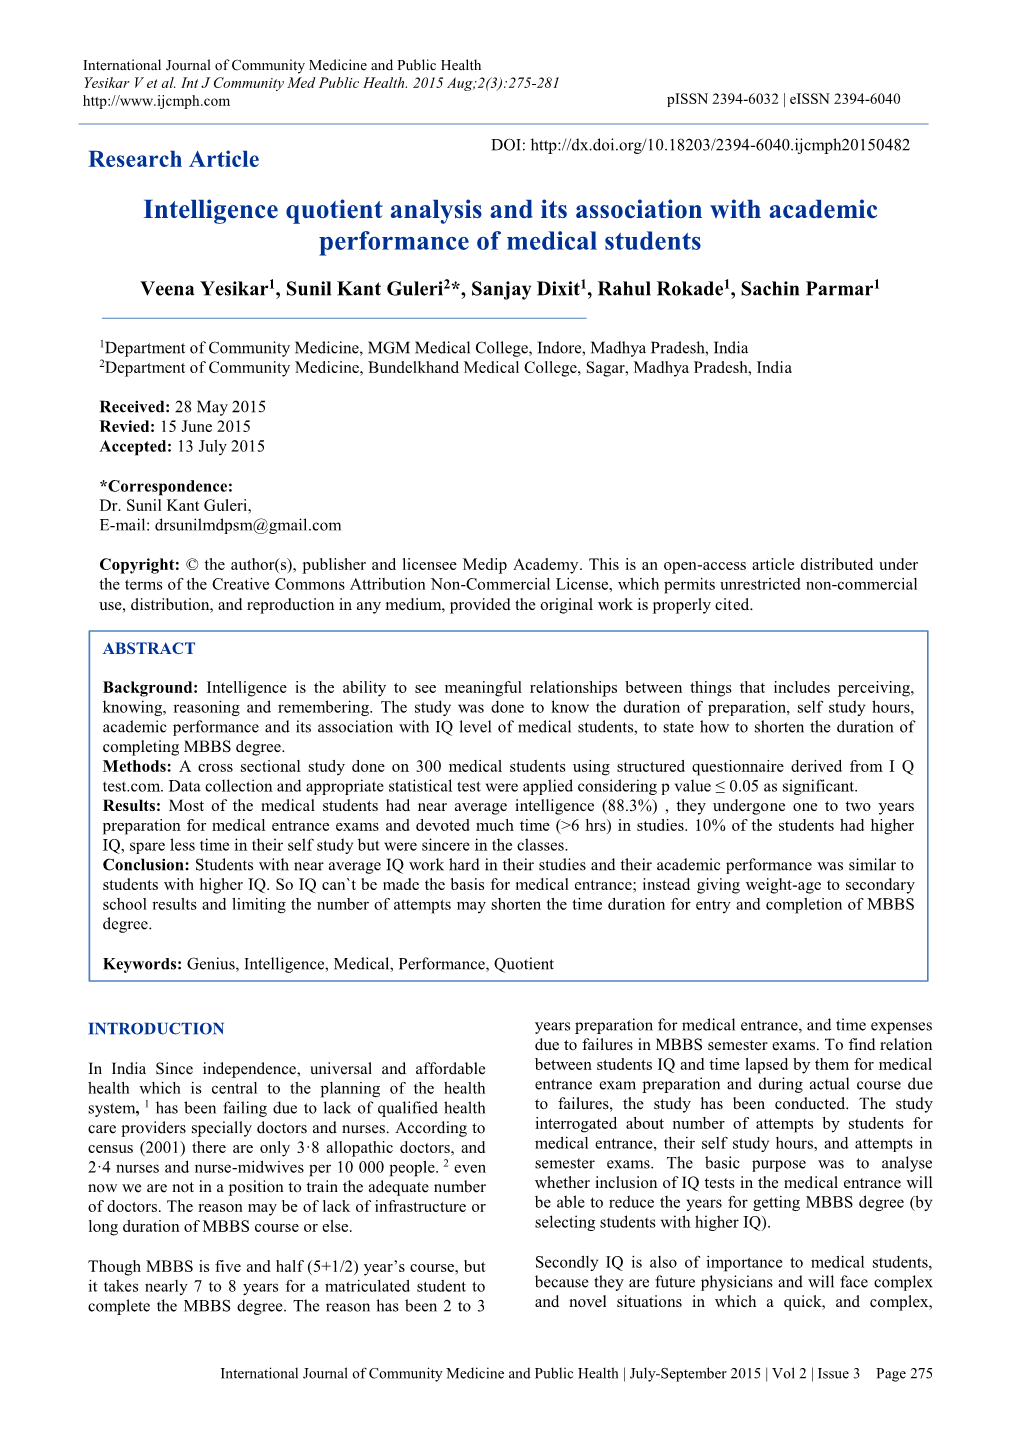 Intelligence Quotient Analysis and Its Association with Academic Performance of Medical Students